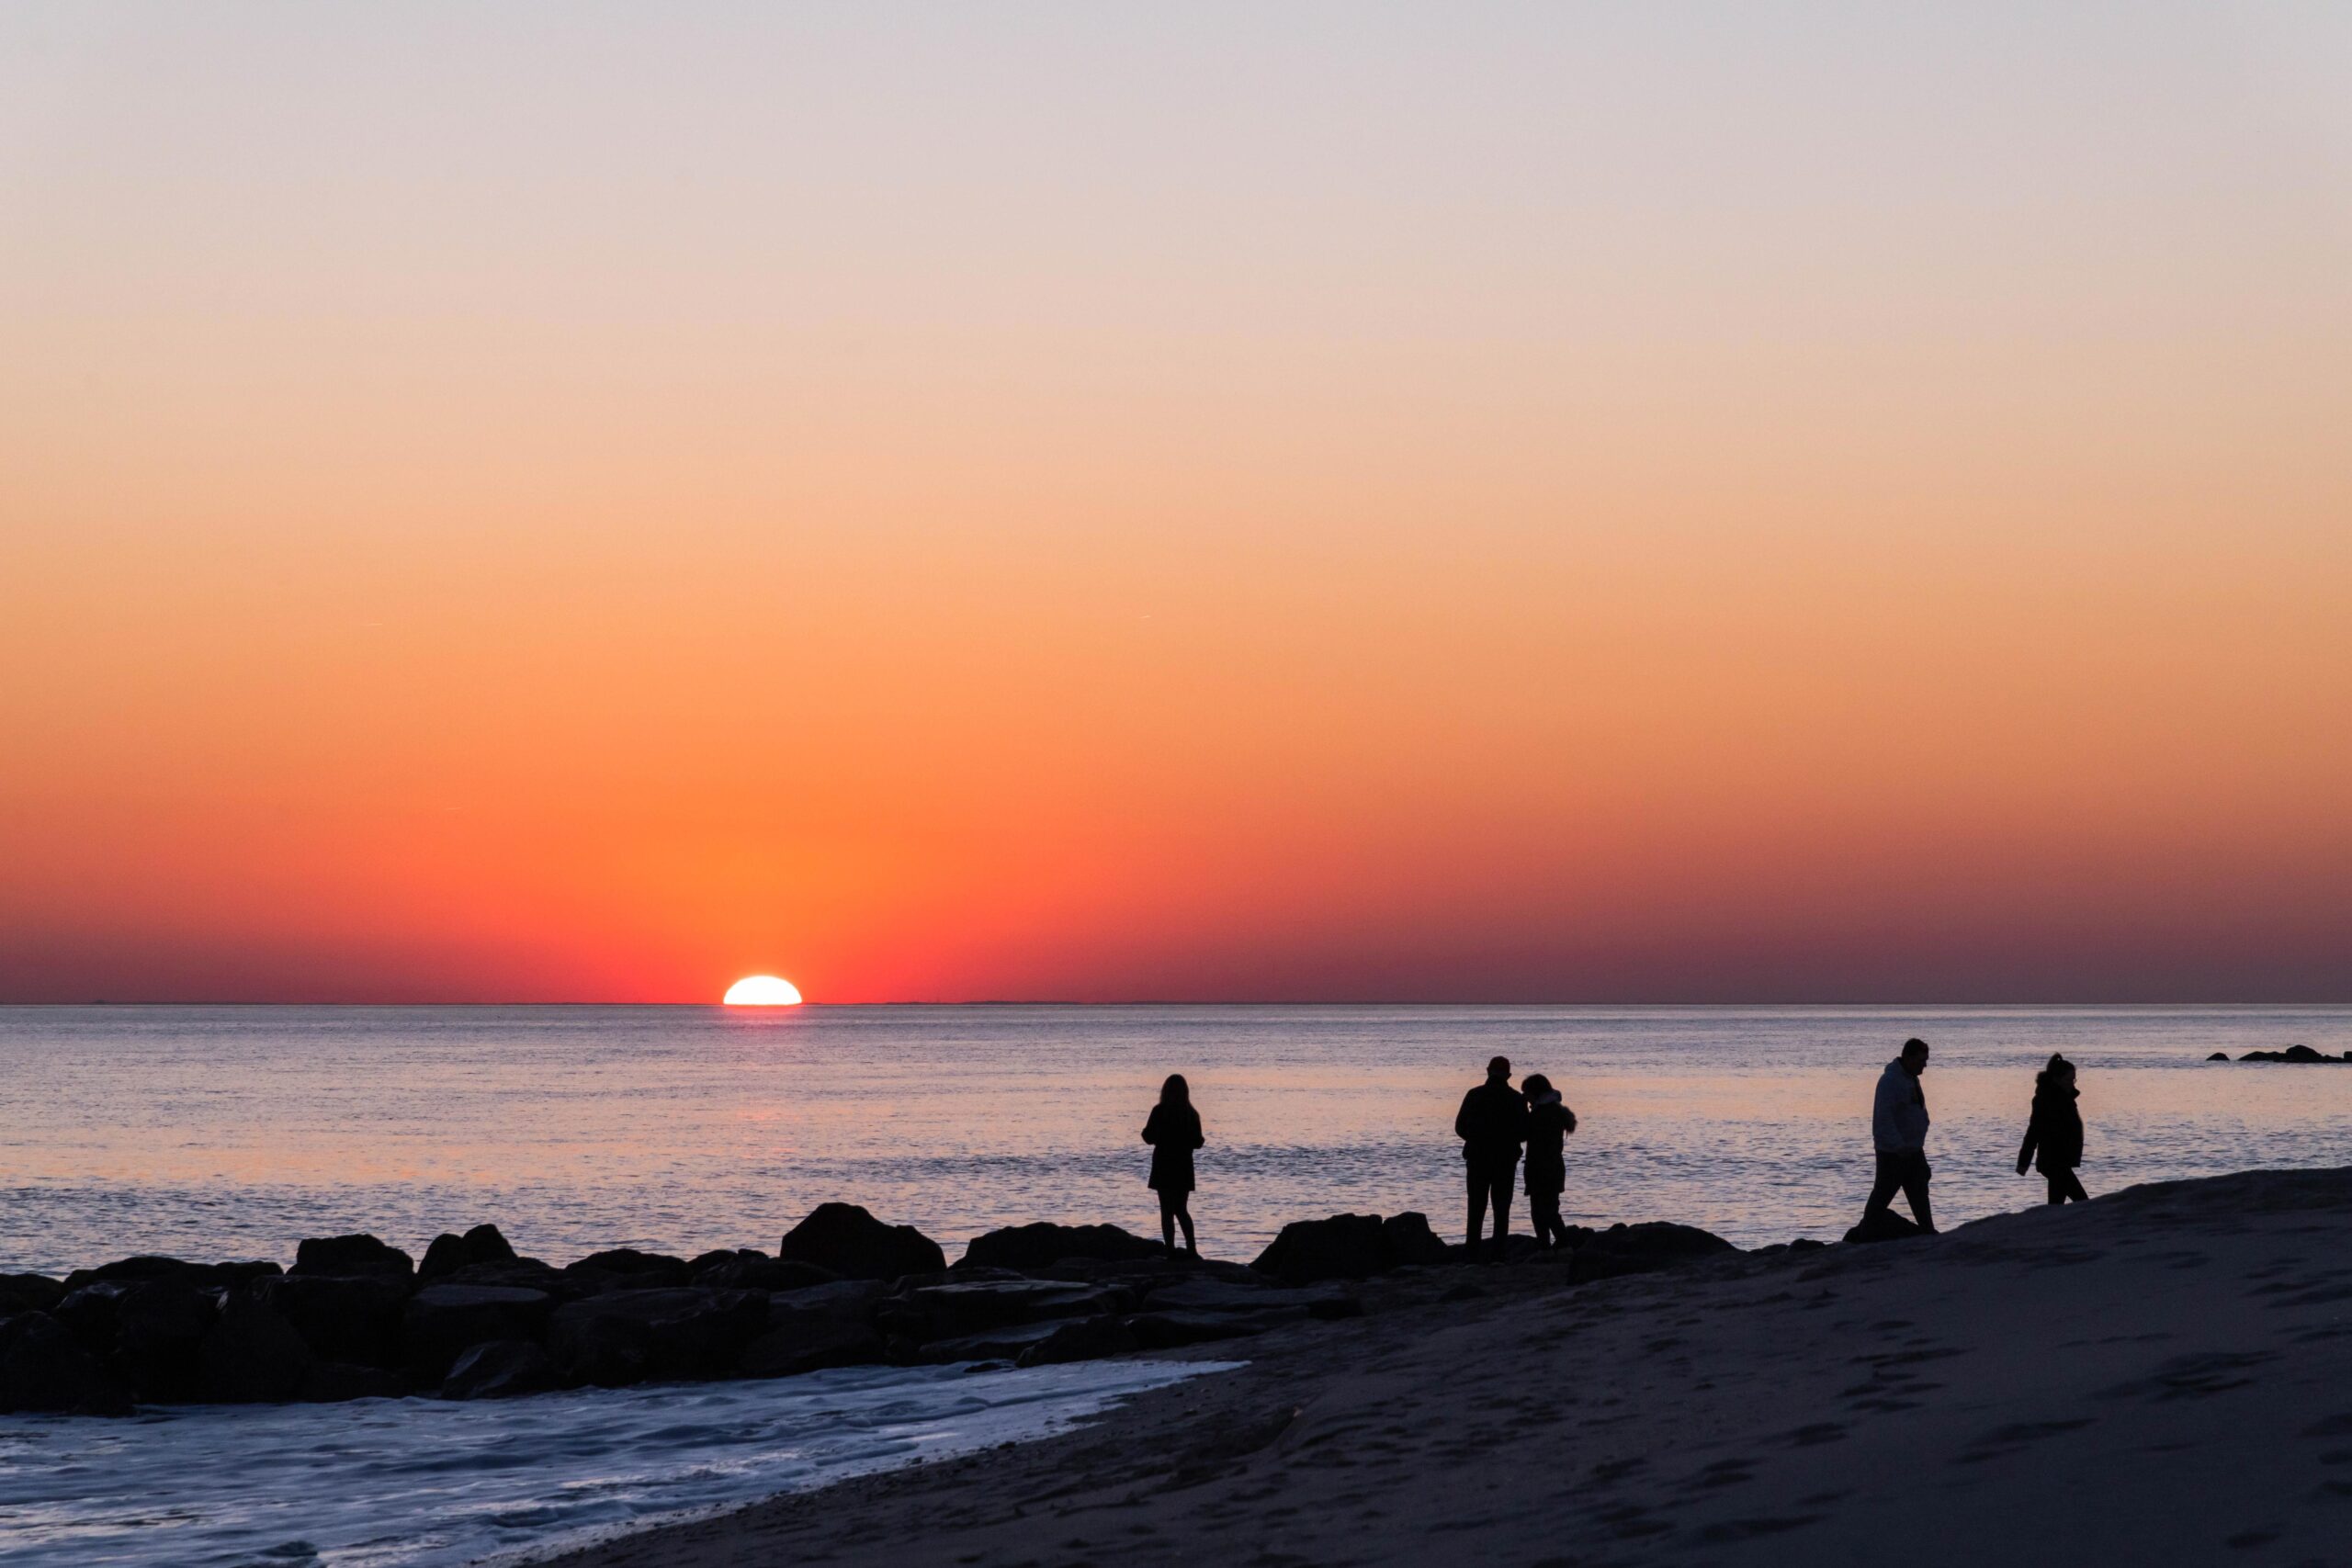 People walking on the beach and on the rocks by the ocean watching the sun dip below the horizon line with pink coloring a clear sky